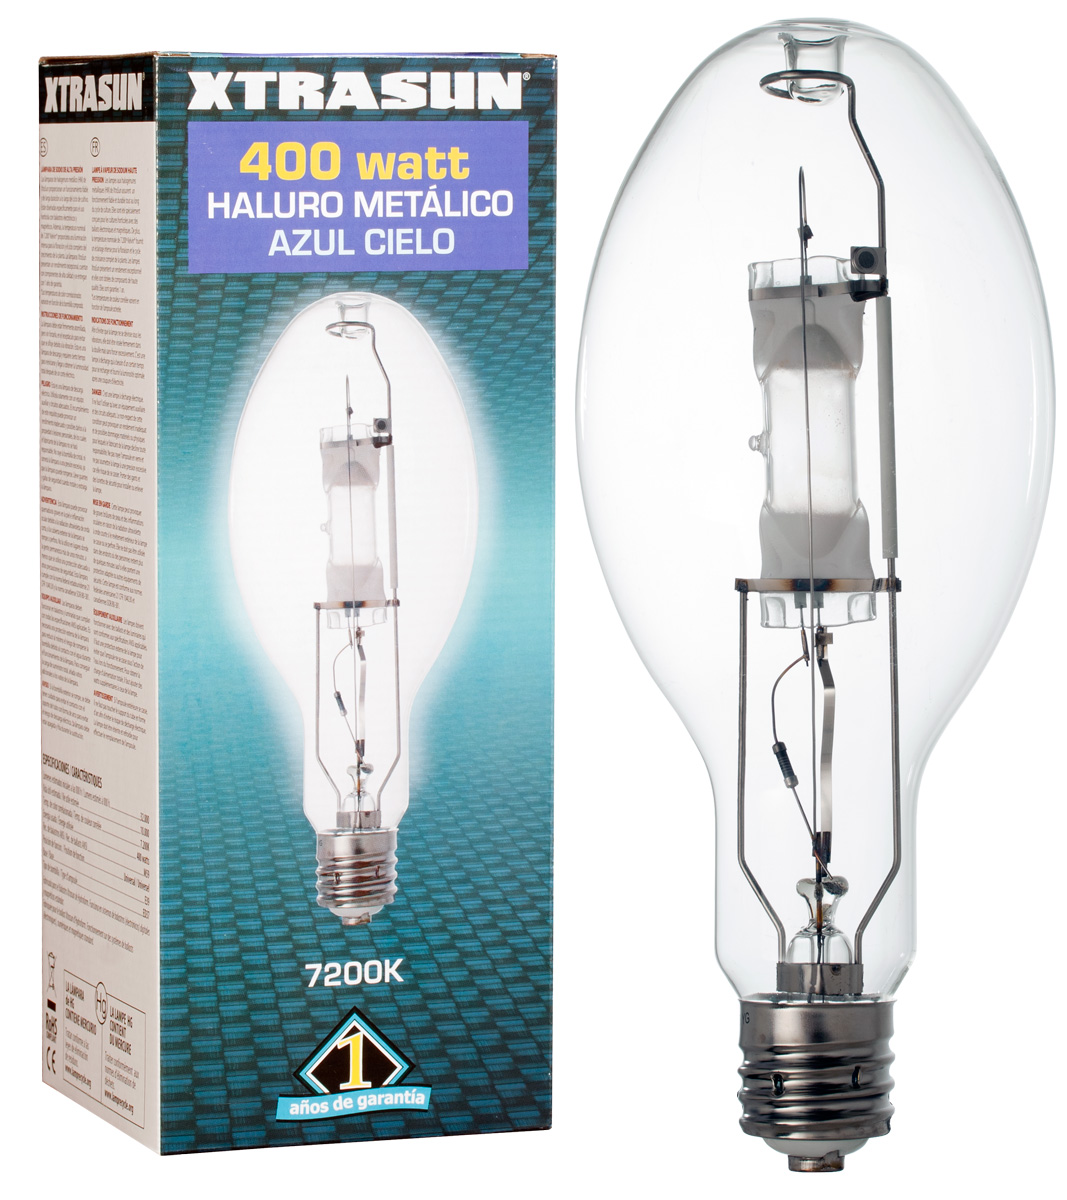 Picture for Xtrasun Metal Halide (MH) Lamp, 400W, 7200K